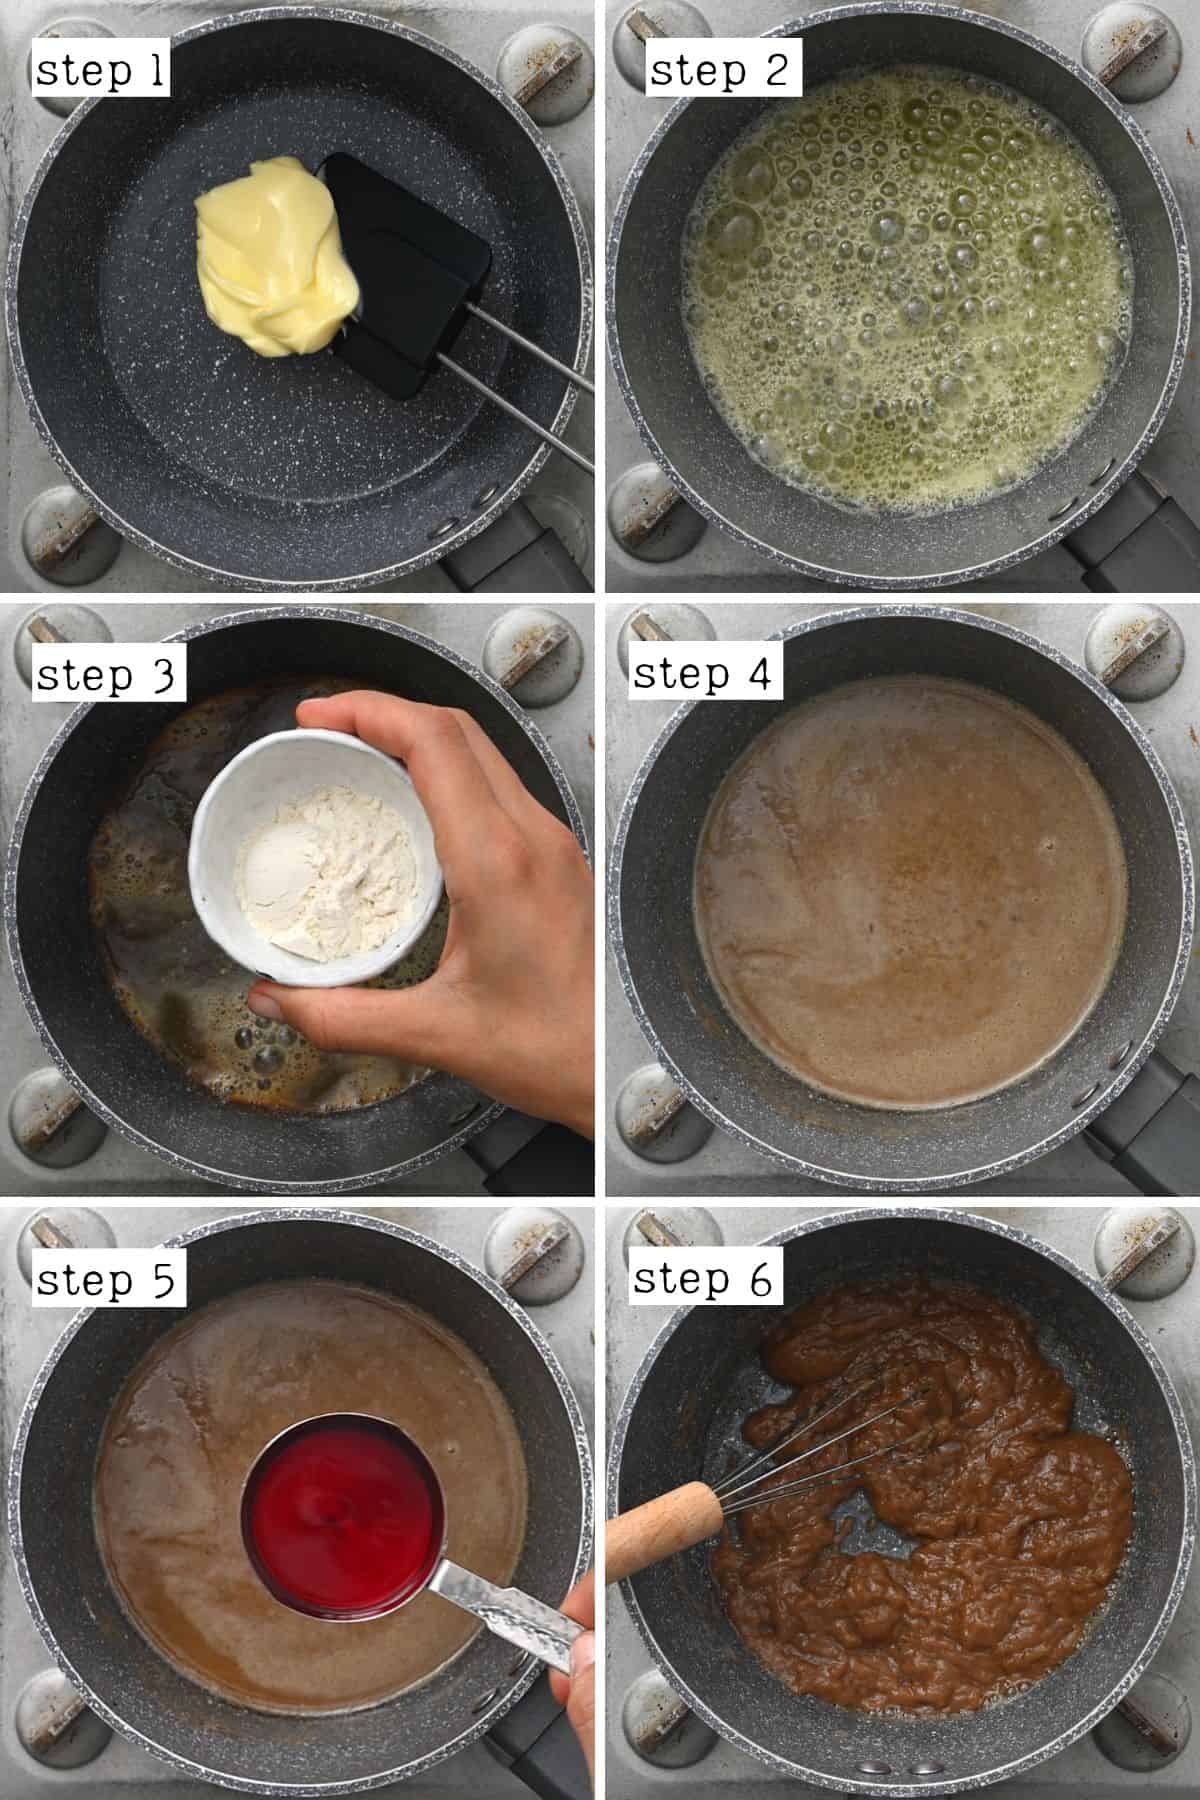 Steps for mixing butter flour and red wine vinegar for au jus